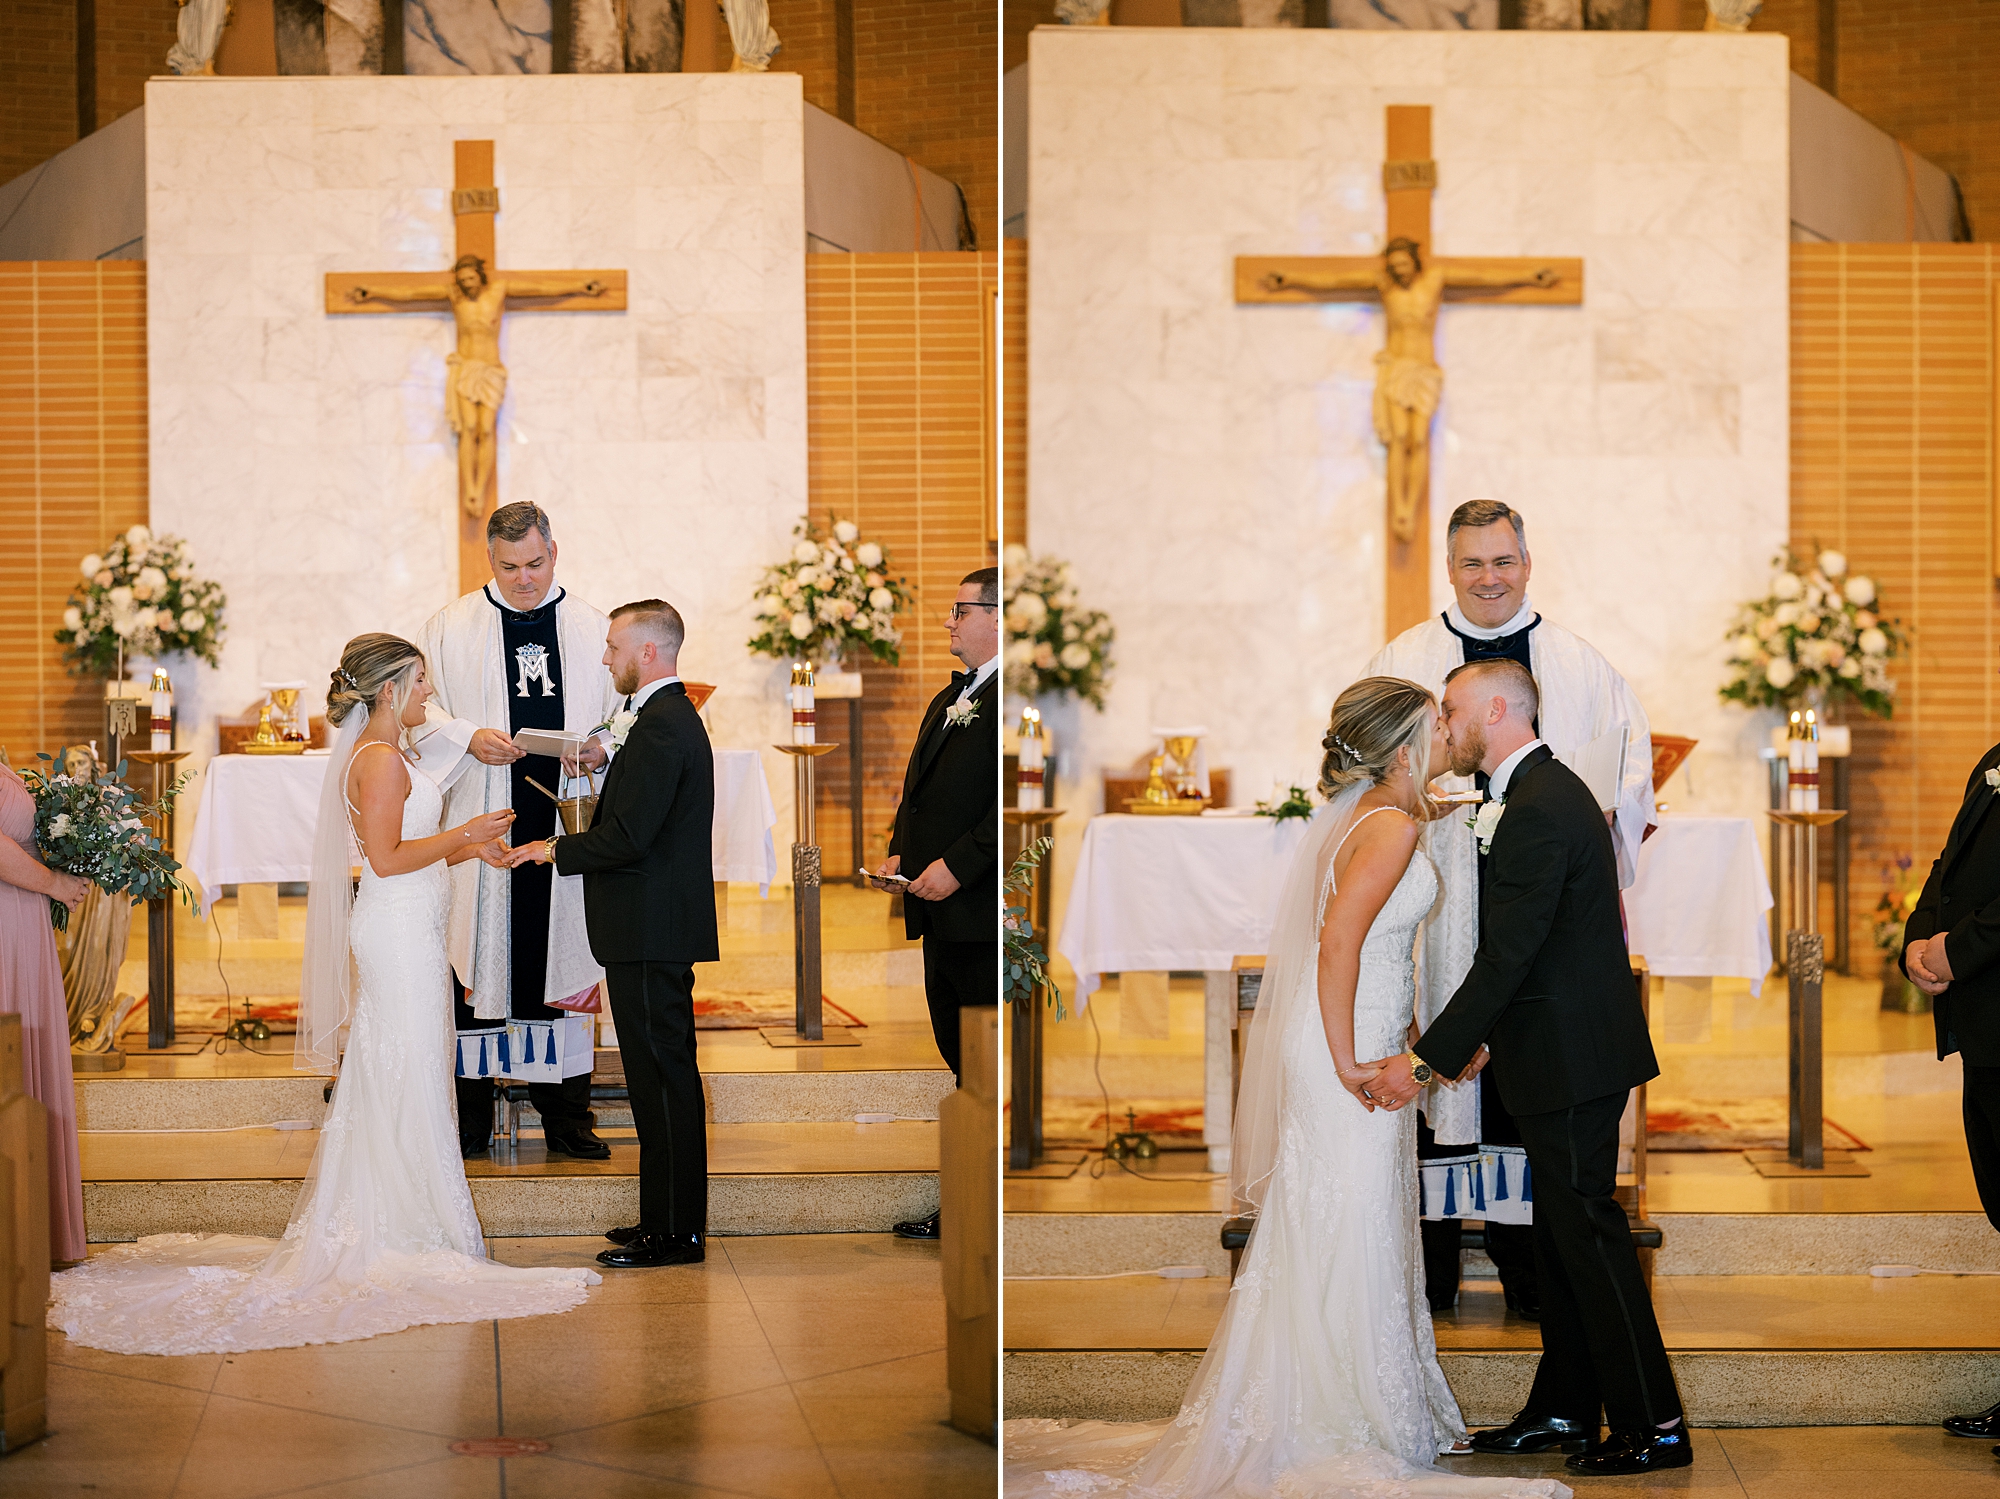 couple exchanges vows during traditional church wedding ceremony in New Jersey